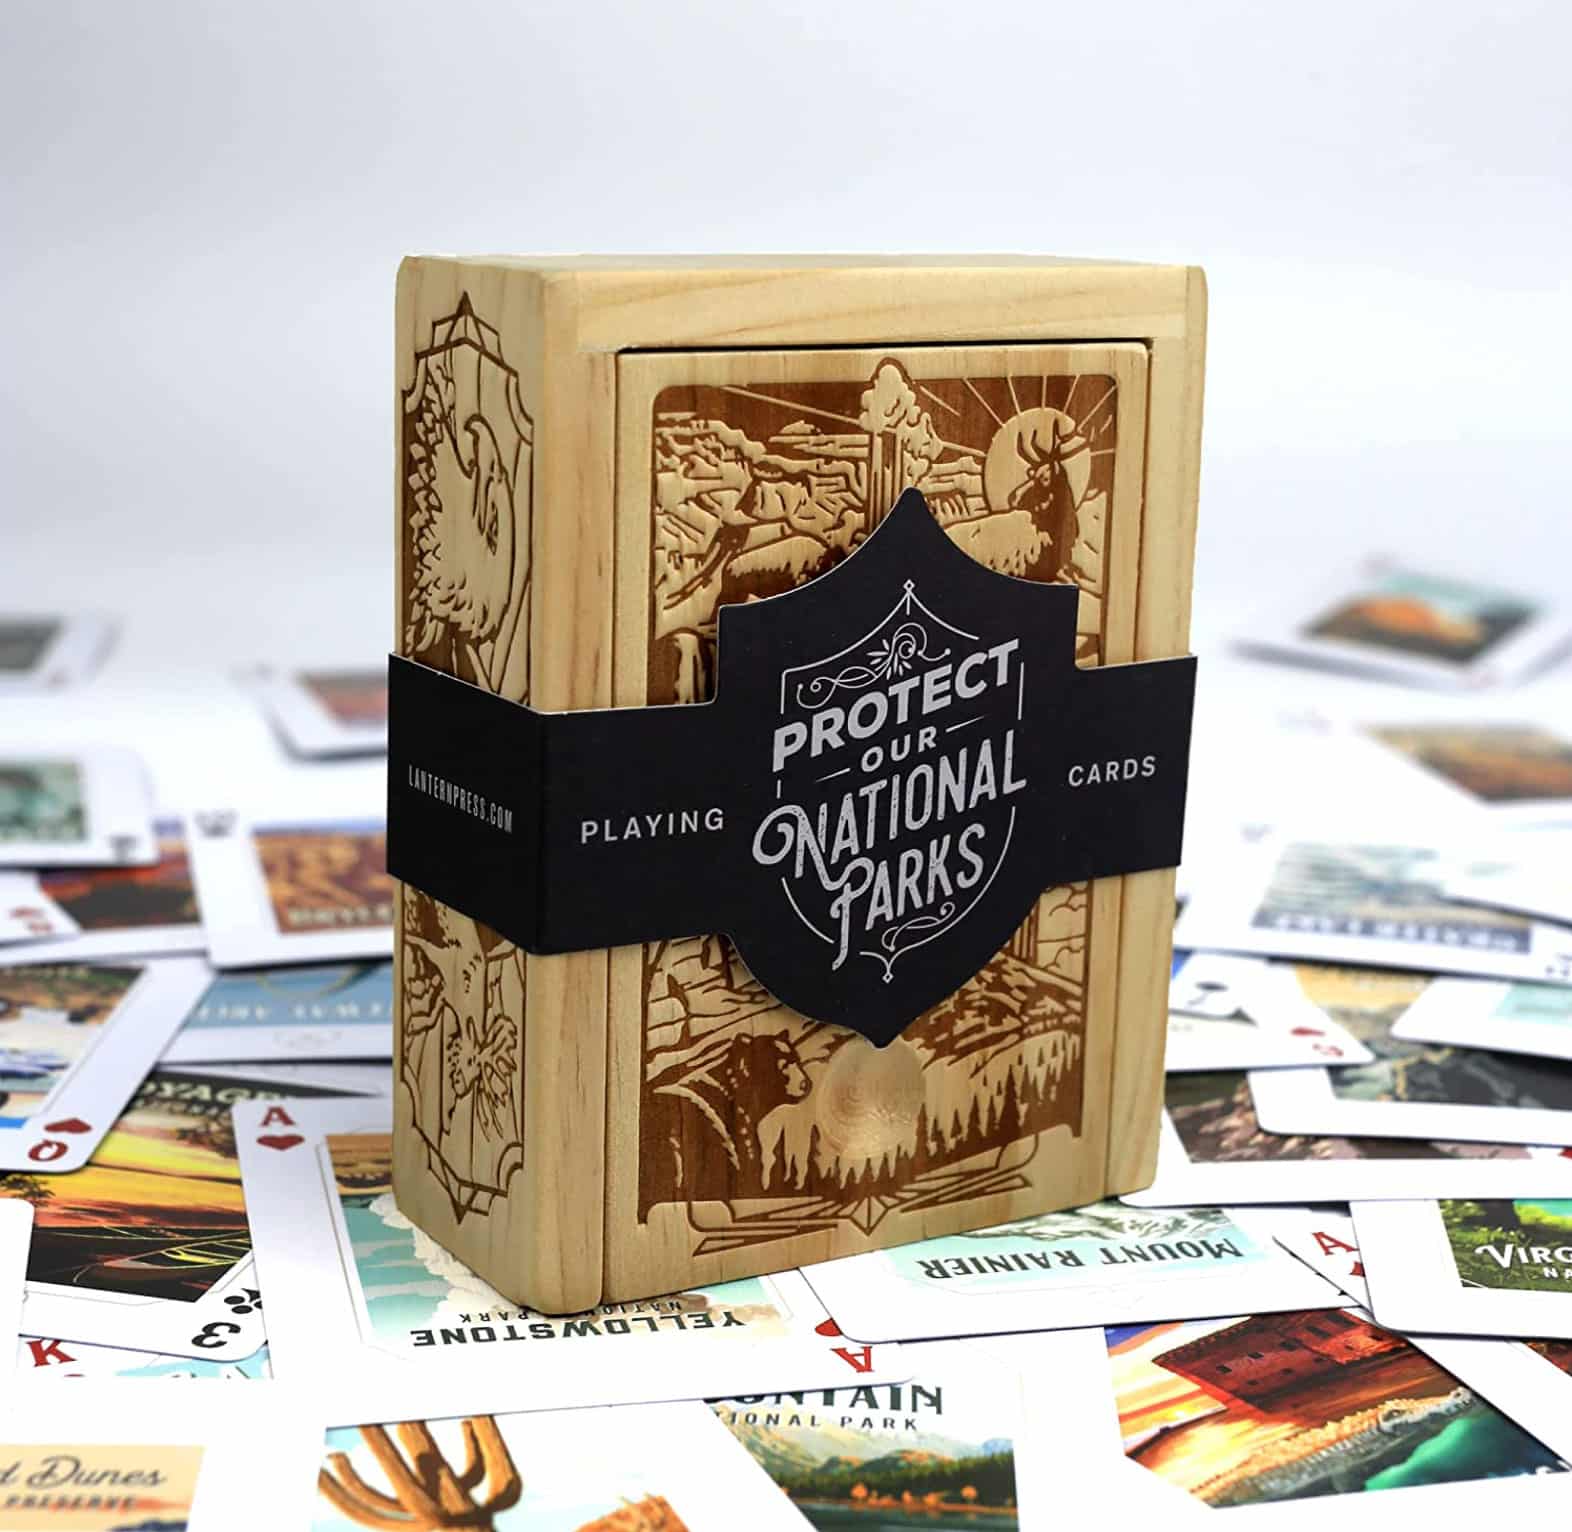 National park playing cards in an embossed wooden case